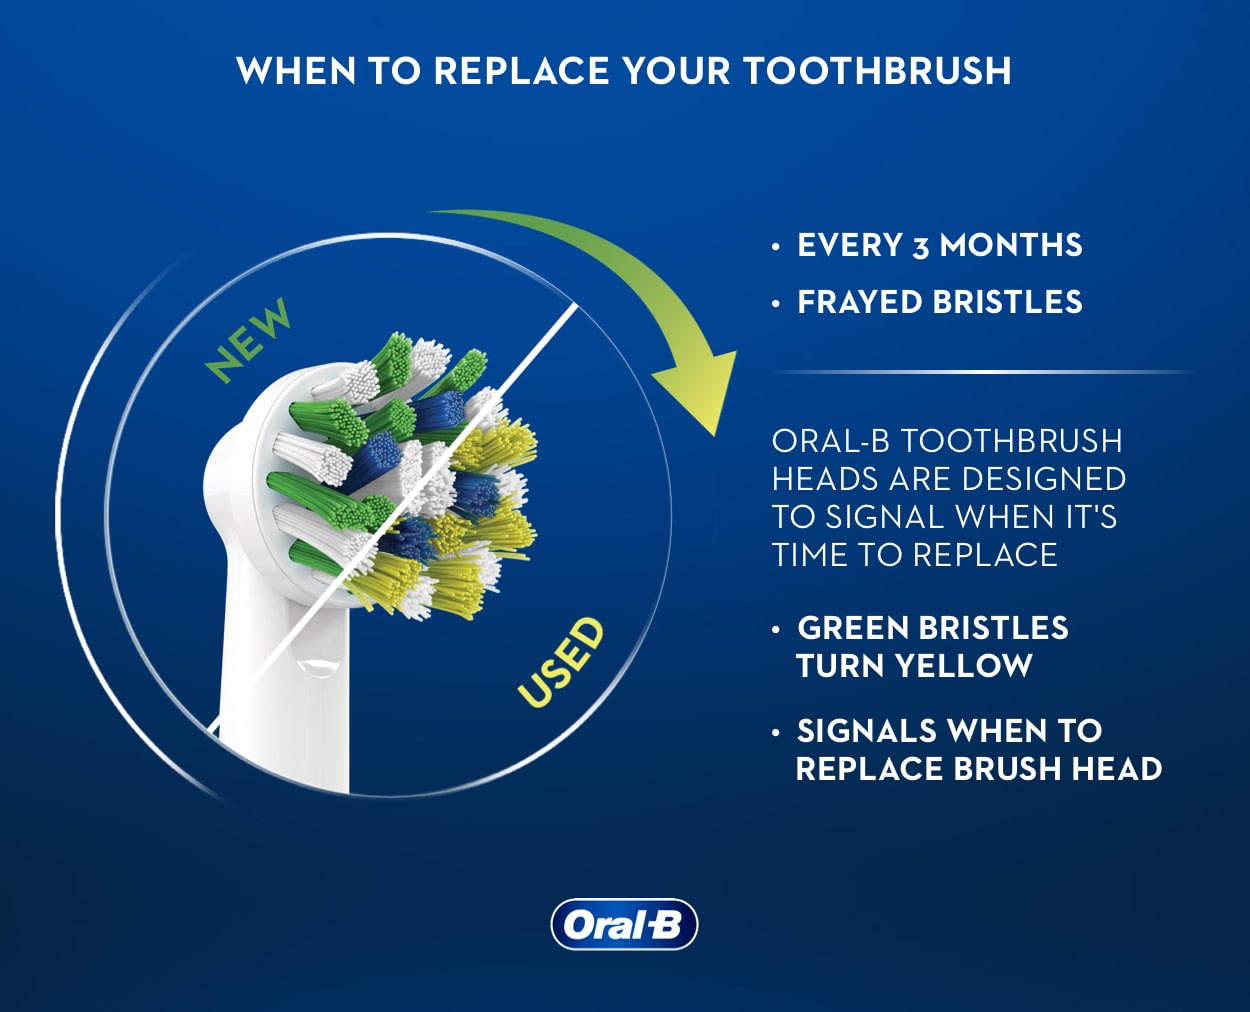 When to Change Your Toothbrush or Brush Head